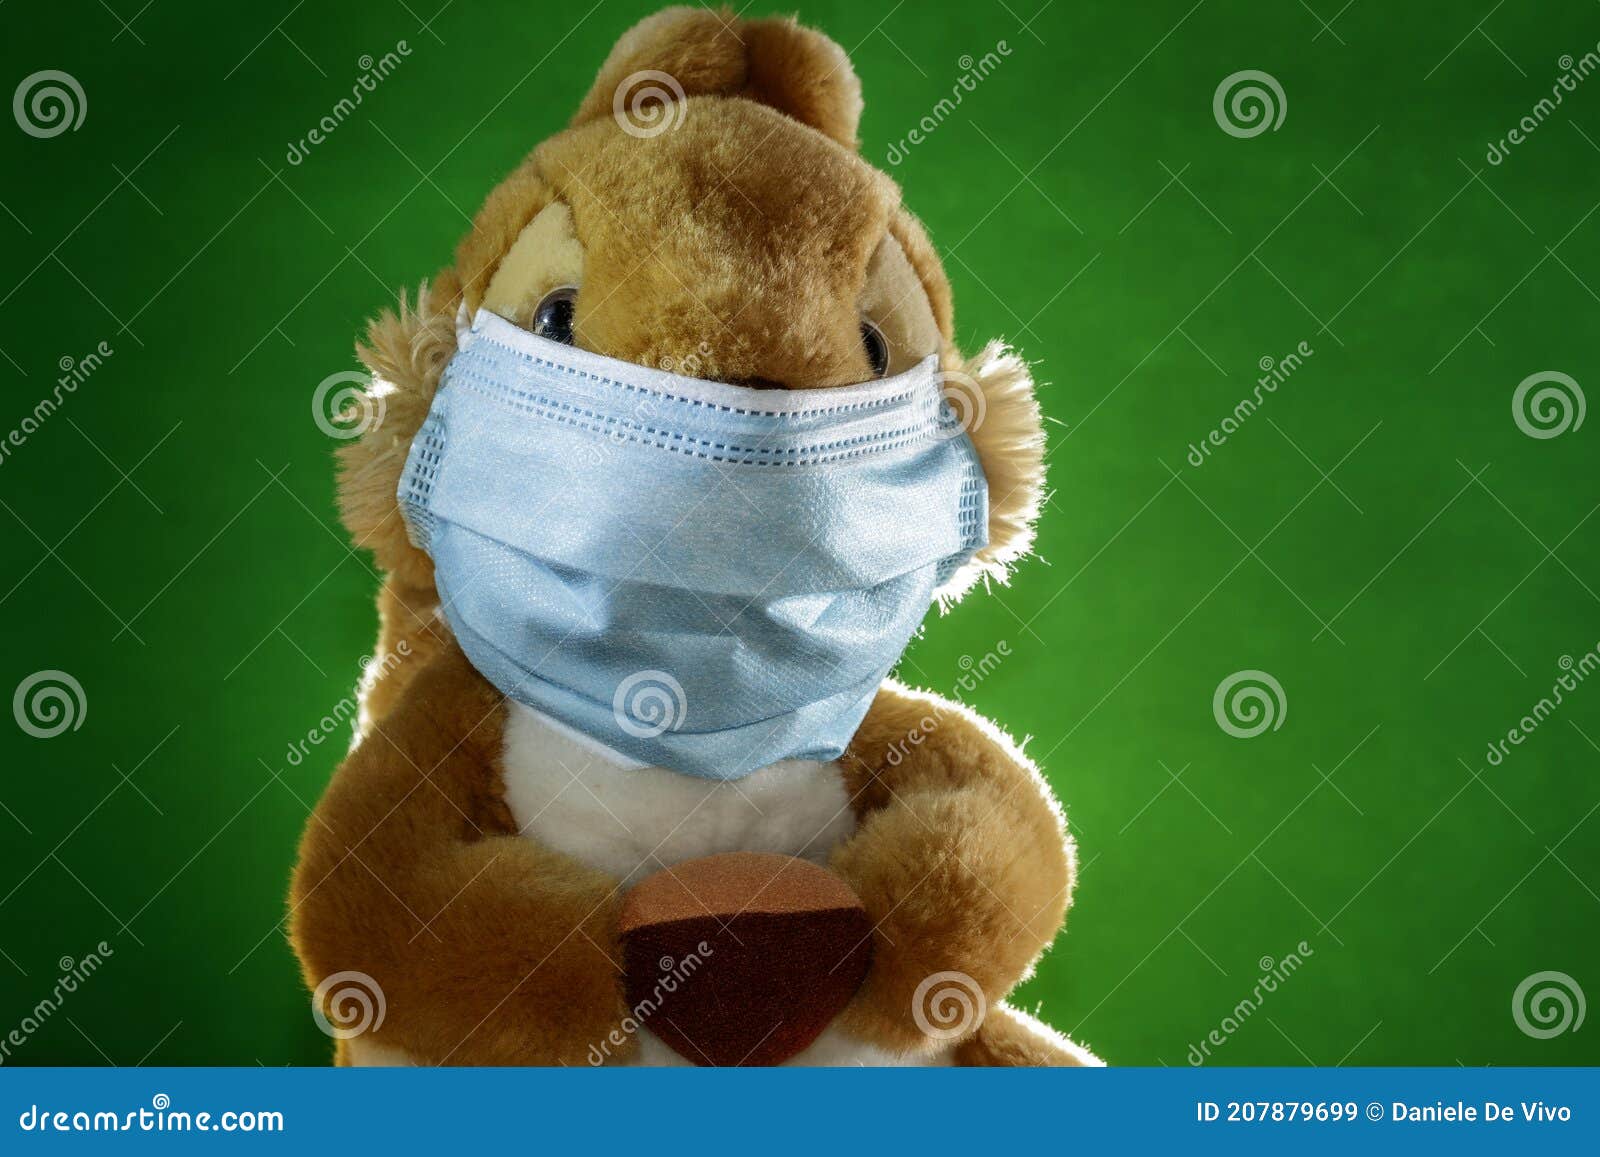 soft toy with surgical mask